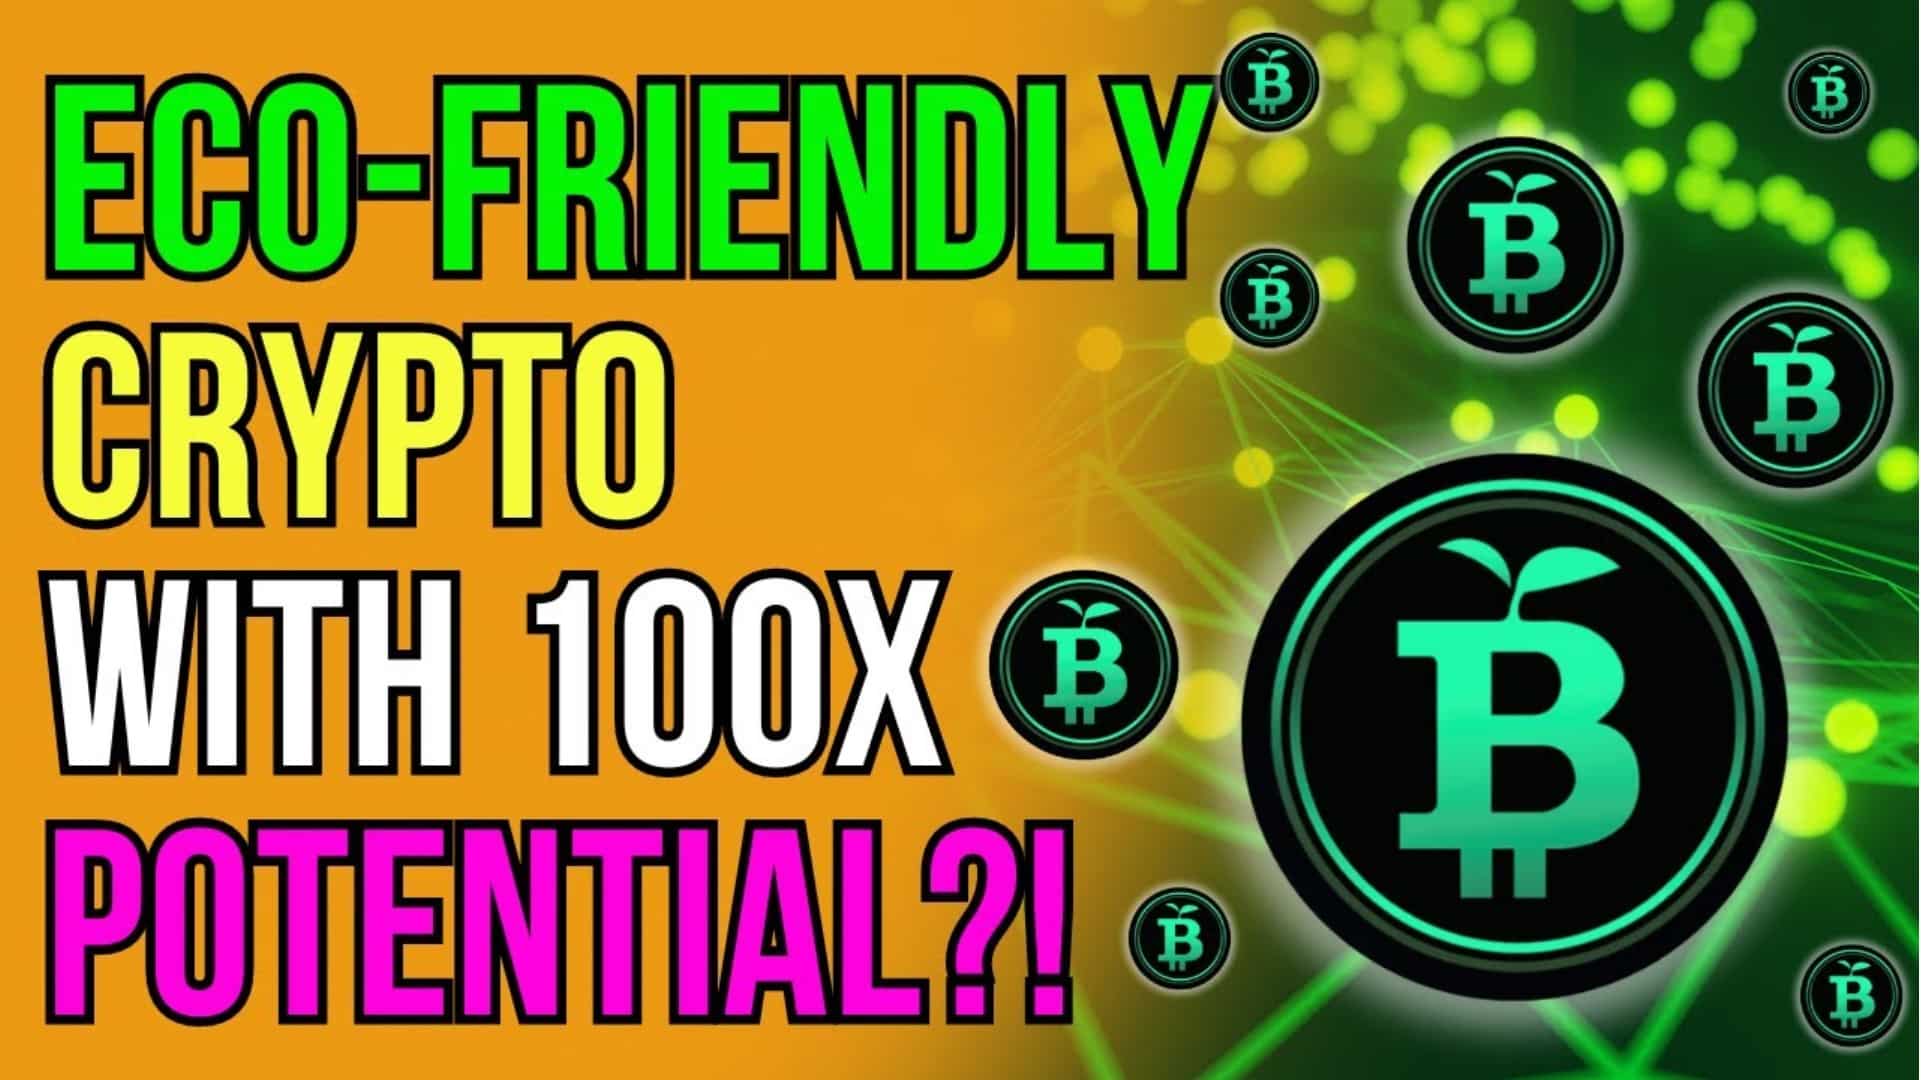 Green Bitcoin's Eco Friendly Crypto Presale Raises Over $5 Million Could It Be the Next 100x Coin?